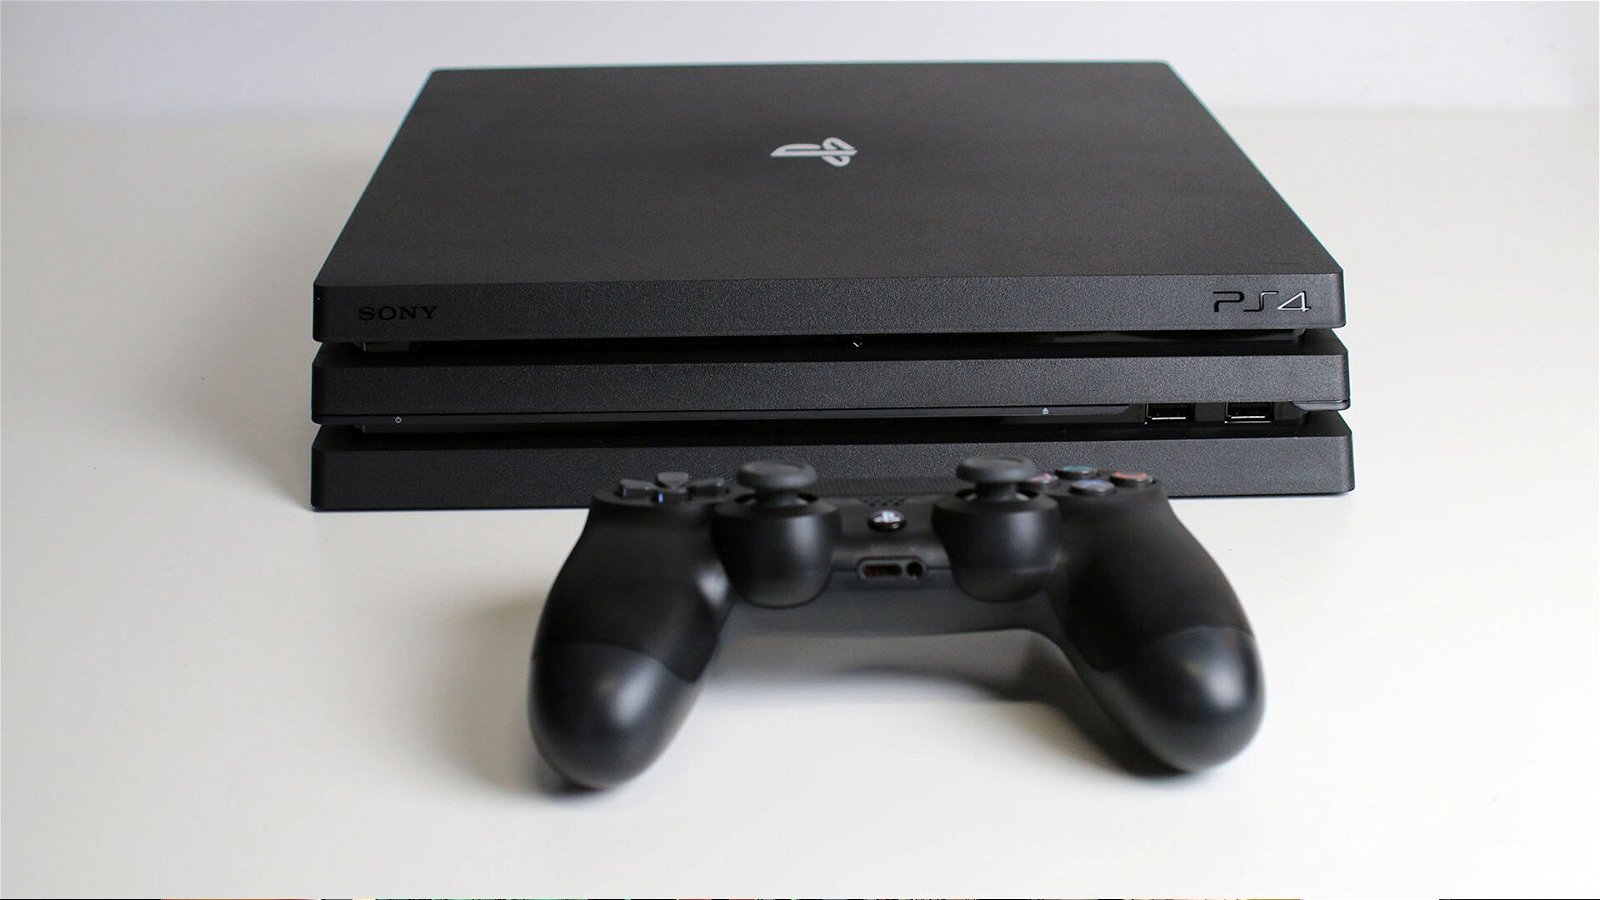 PlayStation 4 Pro Unboxing: New Sony Console and New DualShock 4 Controller